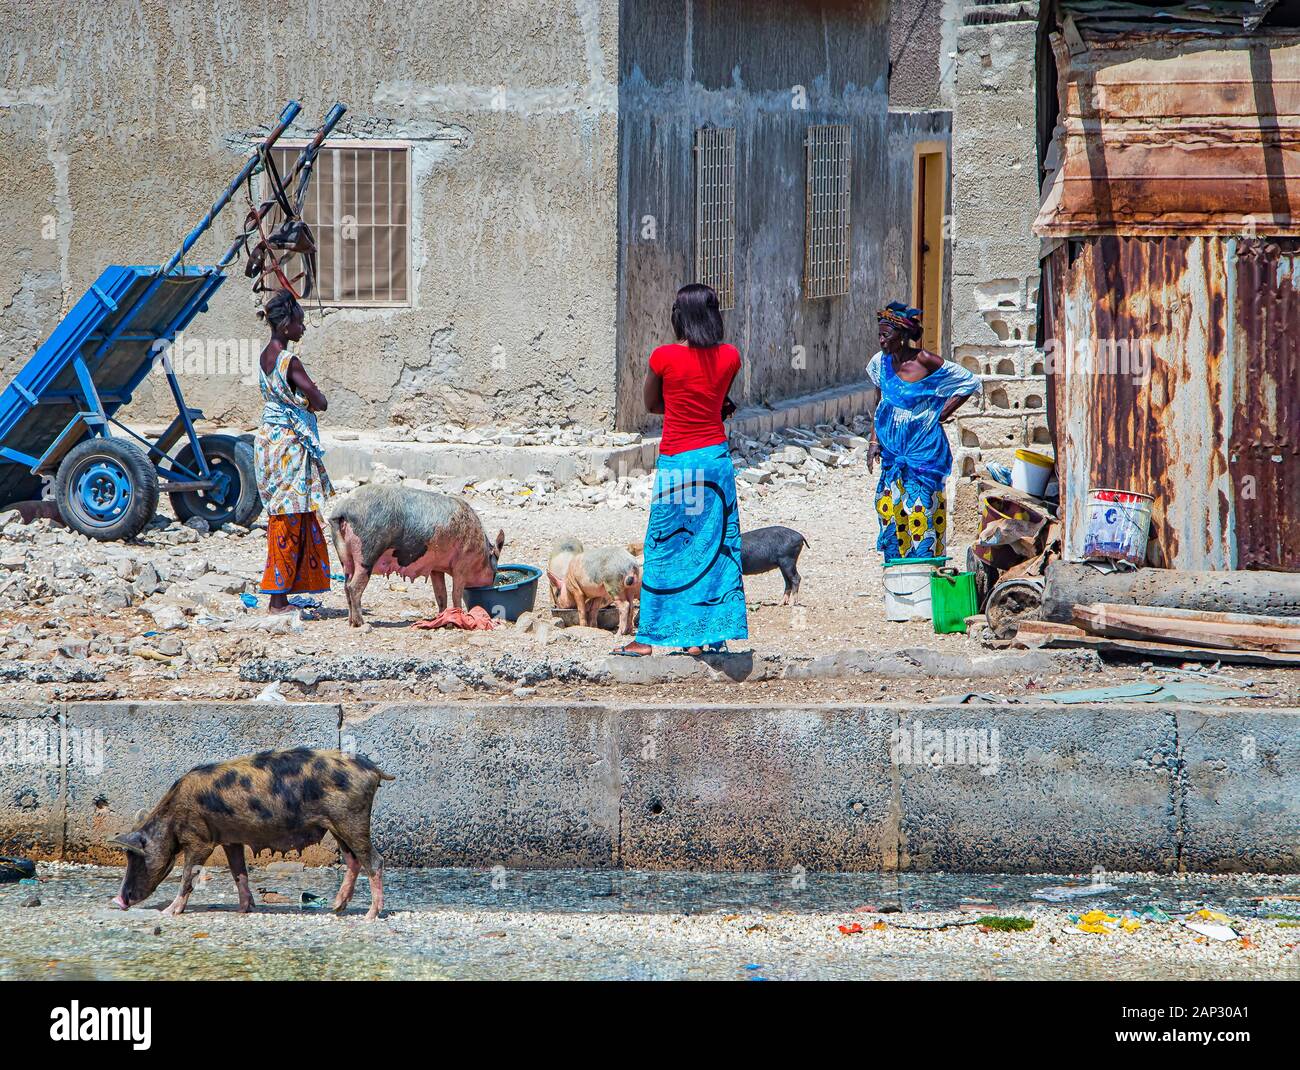 Fadiouth, Senegal, AFRICA - April 26, 2019: Unidentified Senegalese woman in colorful dress feeds a group of domestic pigs in front of old houses in Stock Photo